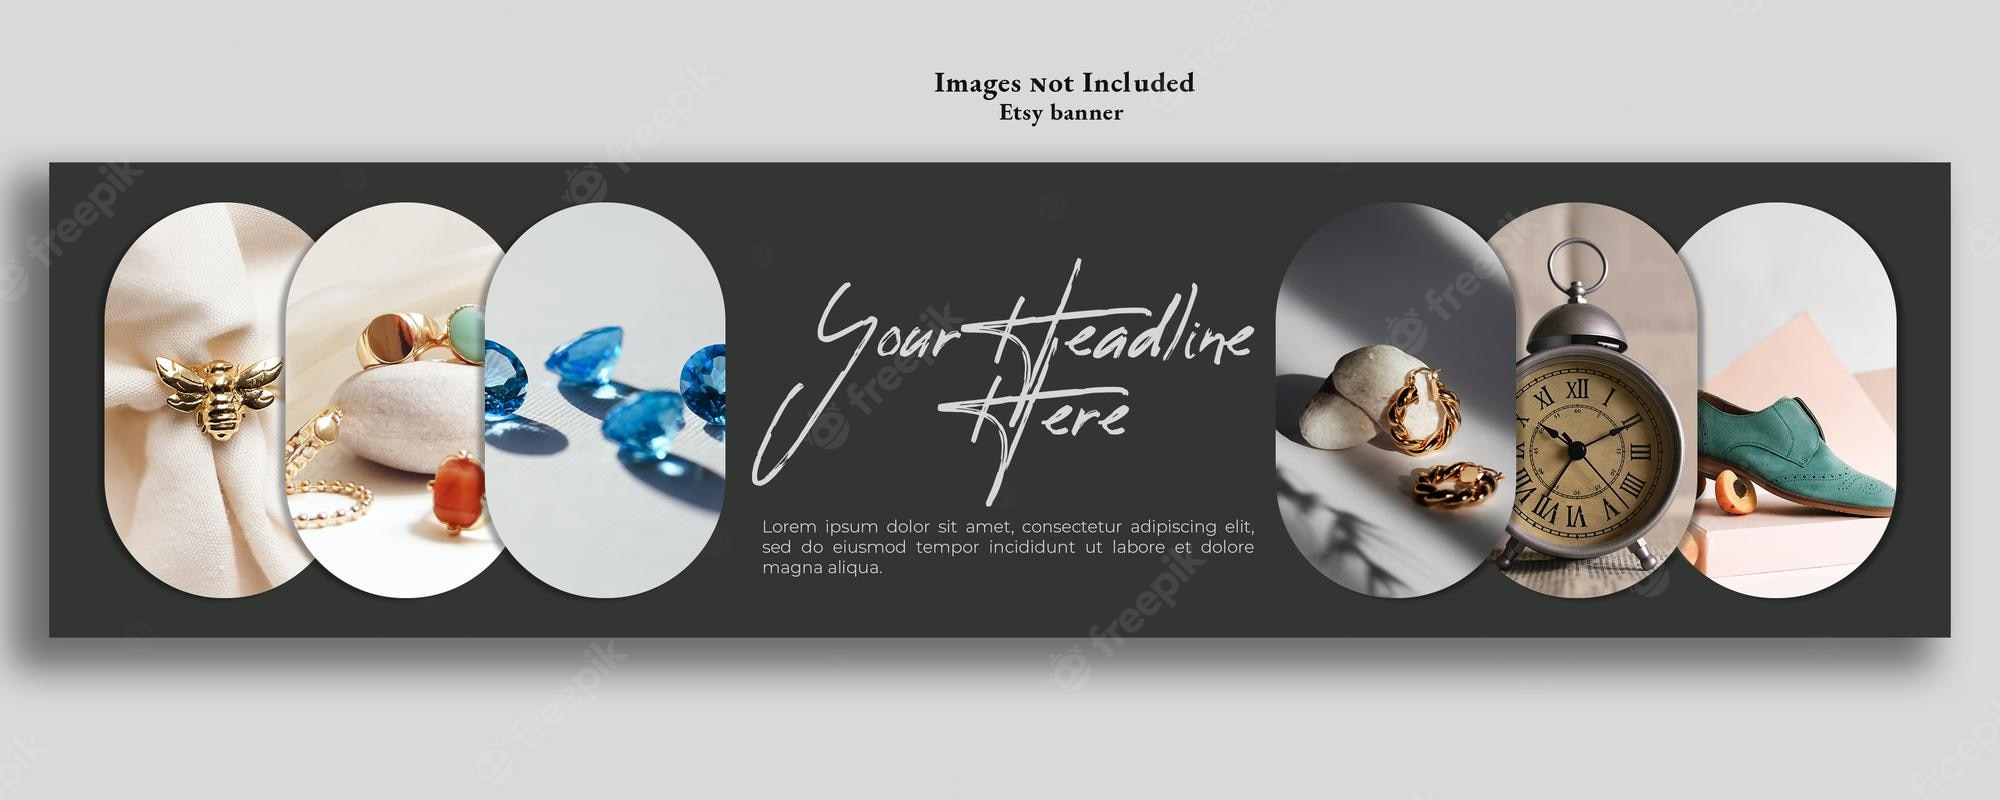 Etsy Banner Images  Free Vectors, Stock Photos & PSD Within Free Etsy Banner Template